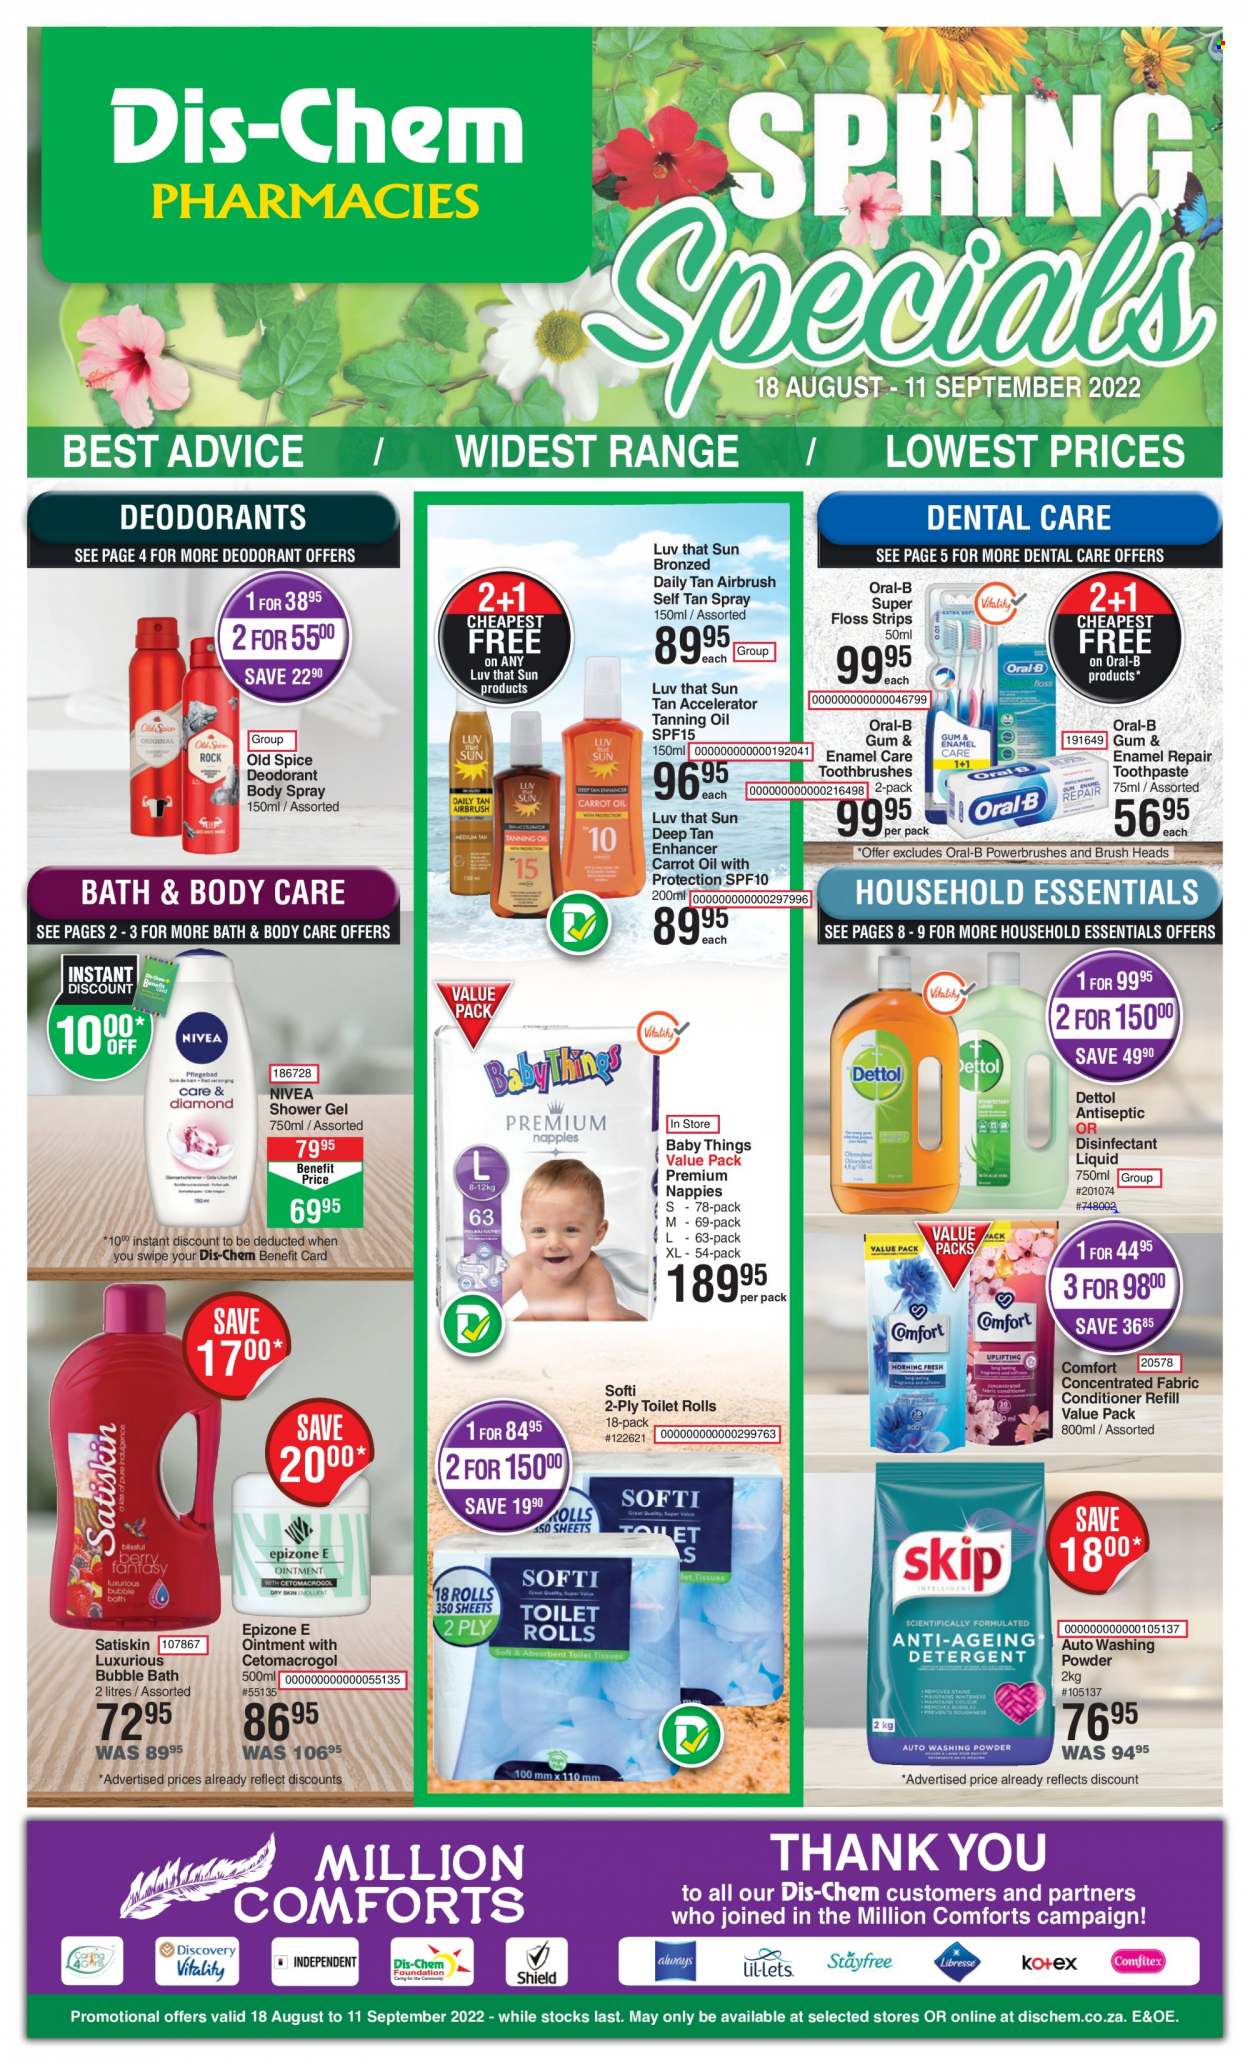 Dis-Chem catalogue  - 18/08/2022 - 11/09/2022 - Sales products - nappies, Dettol, Nivea, ointment, toilet paper, desinfection, fabric conditioner, laundry powder, bubble bath, shower gel, Old Spice, Satiskin, Oral-B, toothpaste, body spray, anti-perspirant, deodorant. Page 1.